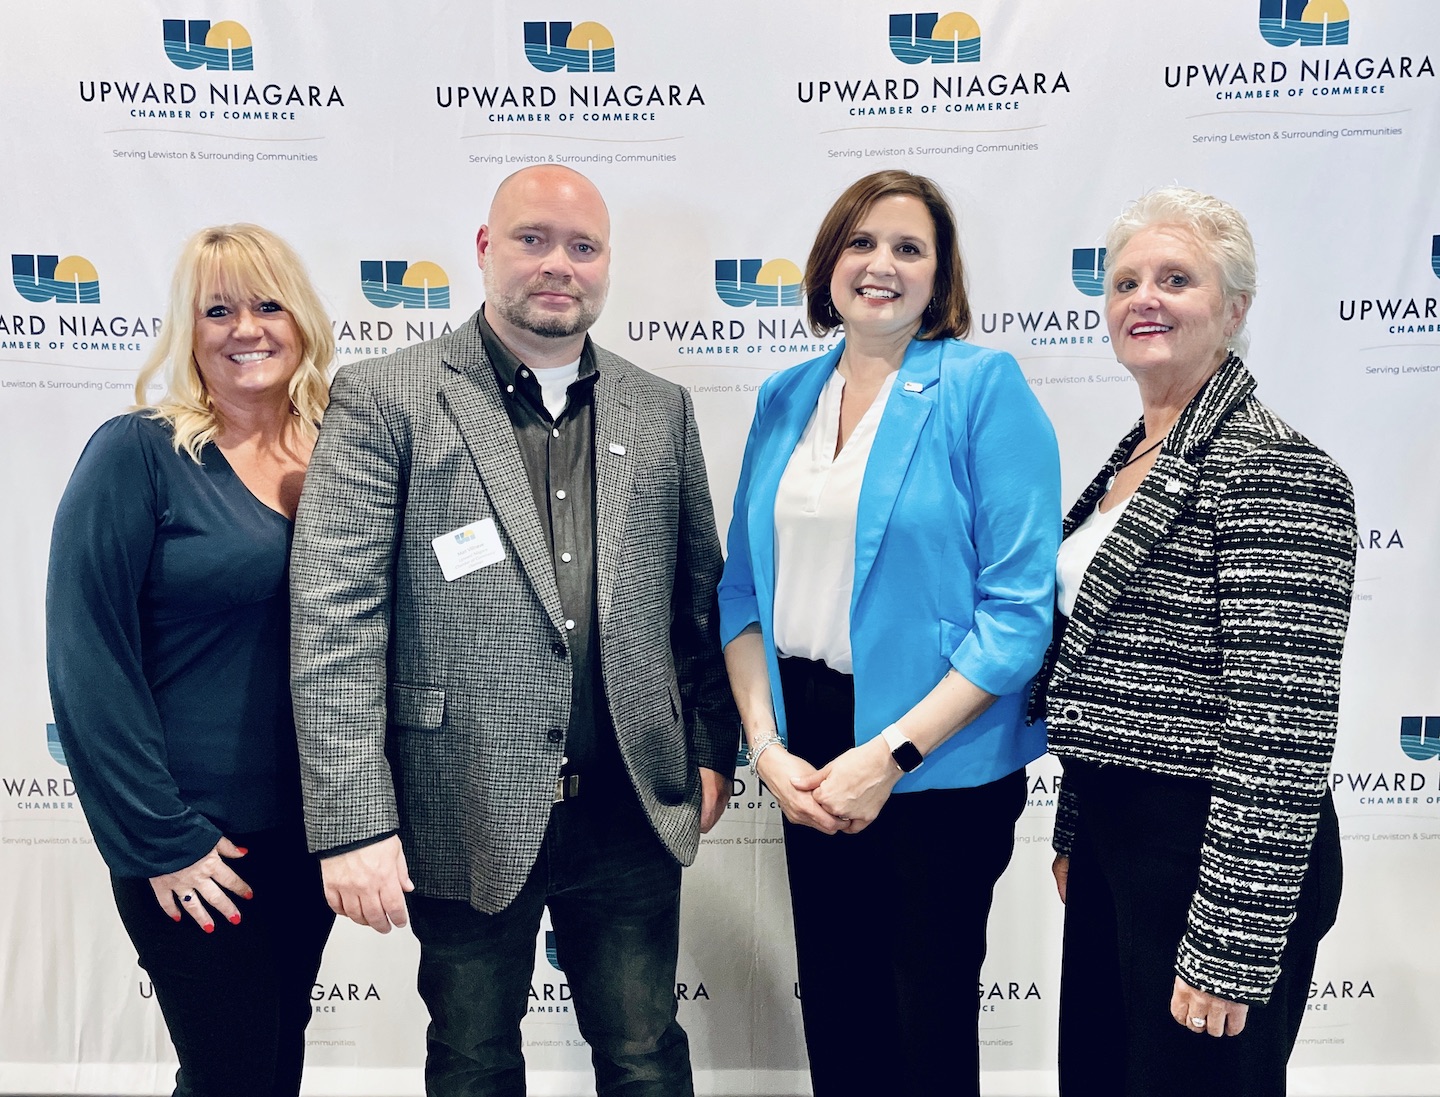 From left, Upward Niagara Chamber of Commerce Board Chairman Matt Villnave is joined by staff members Suzanne Raby, President Jennifer Pauly and Susie Reinhardt.